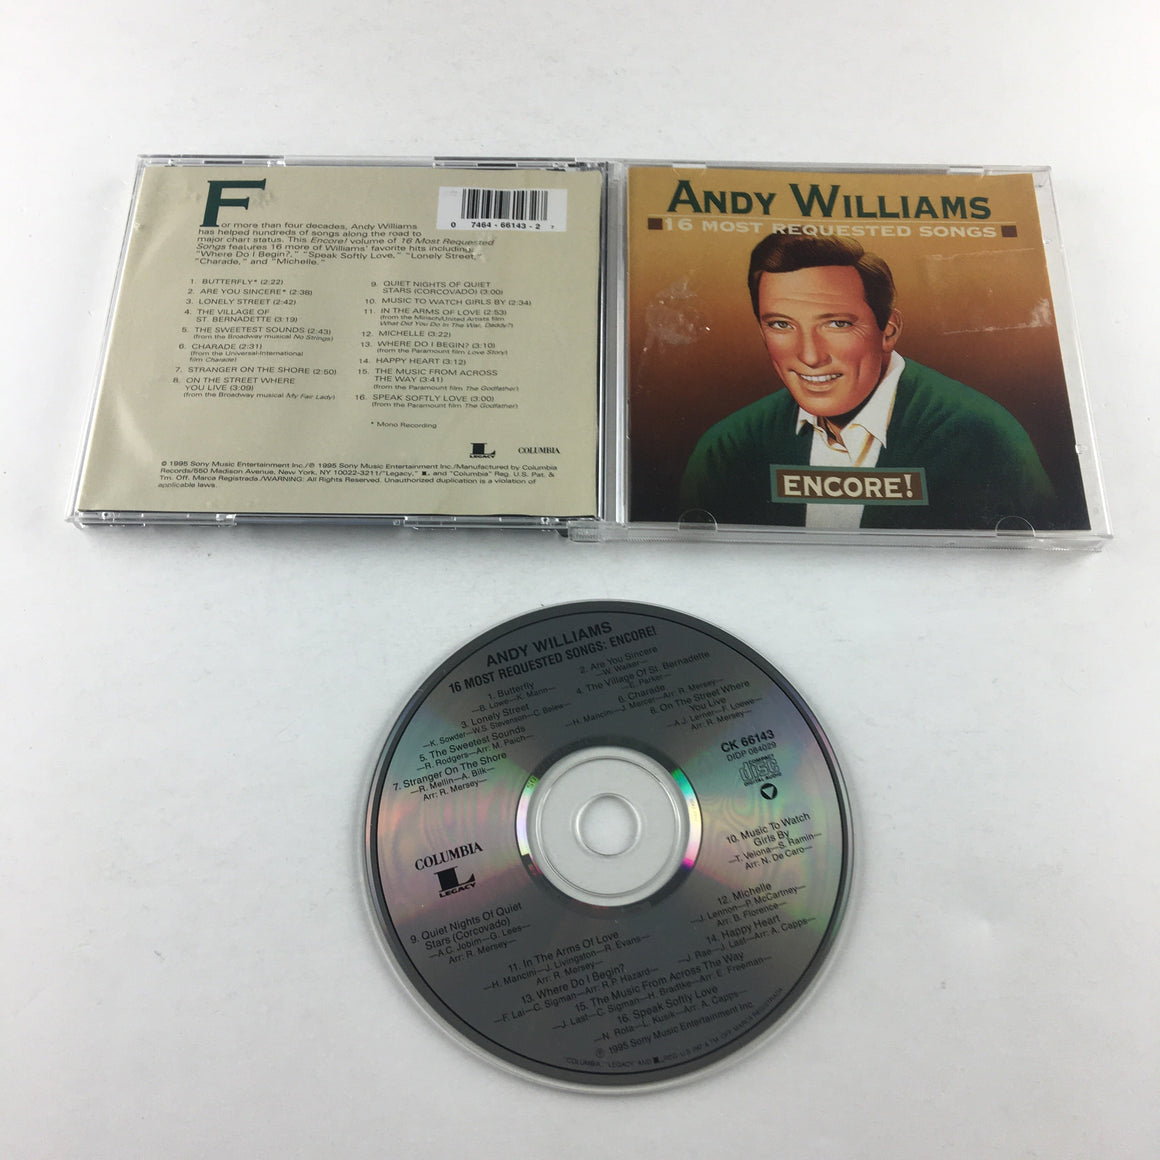 Andy Williams 16 Most Requested Songs: Encore! Used CD VG+\VG+